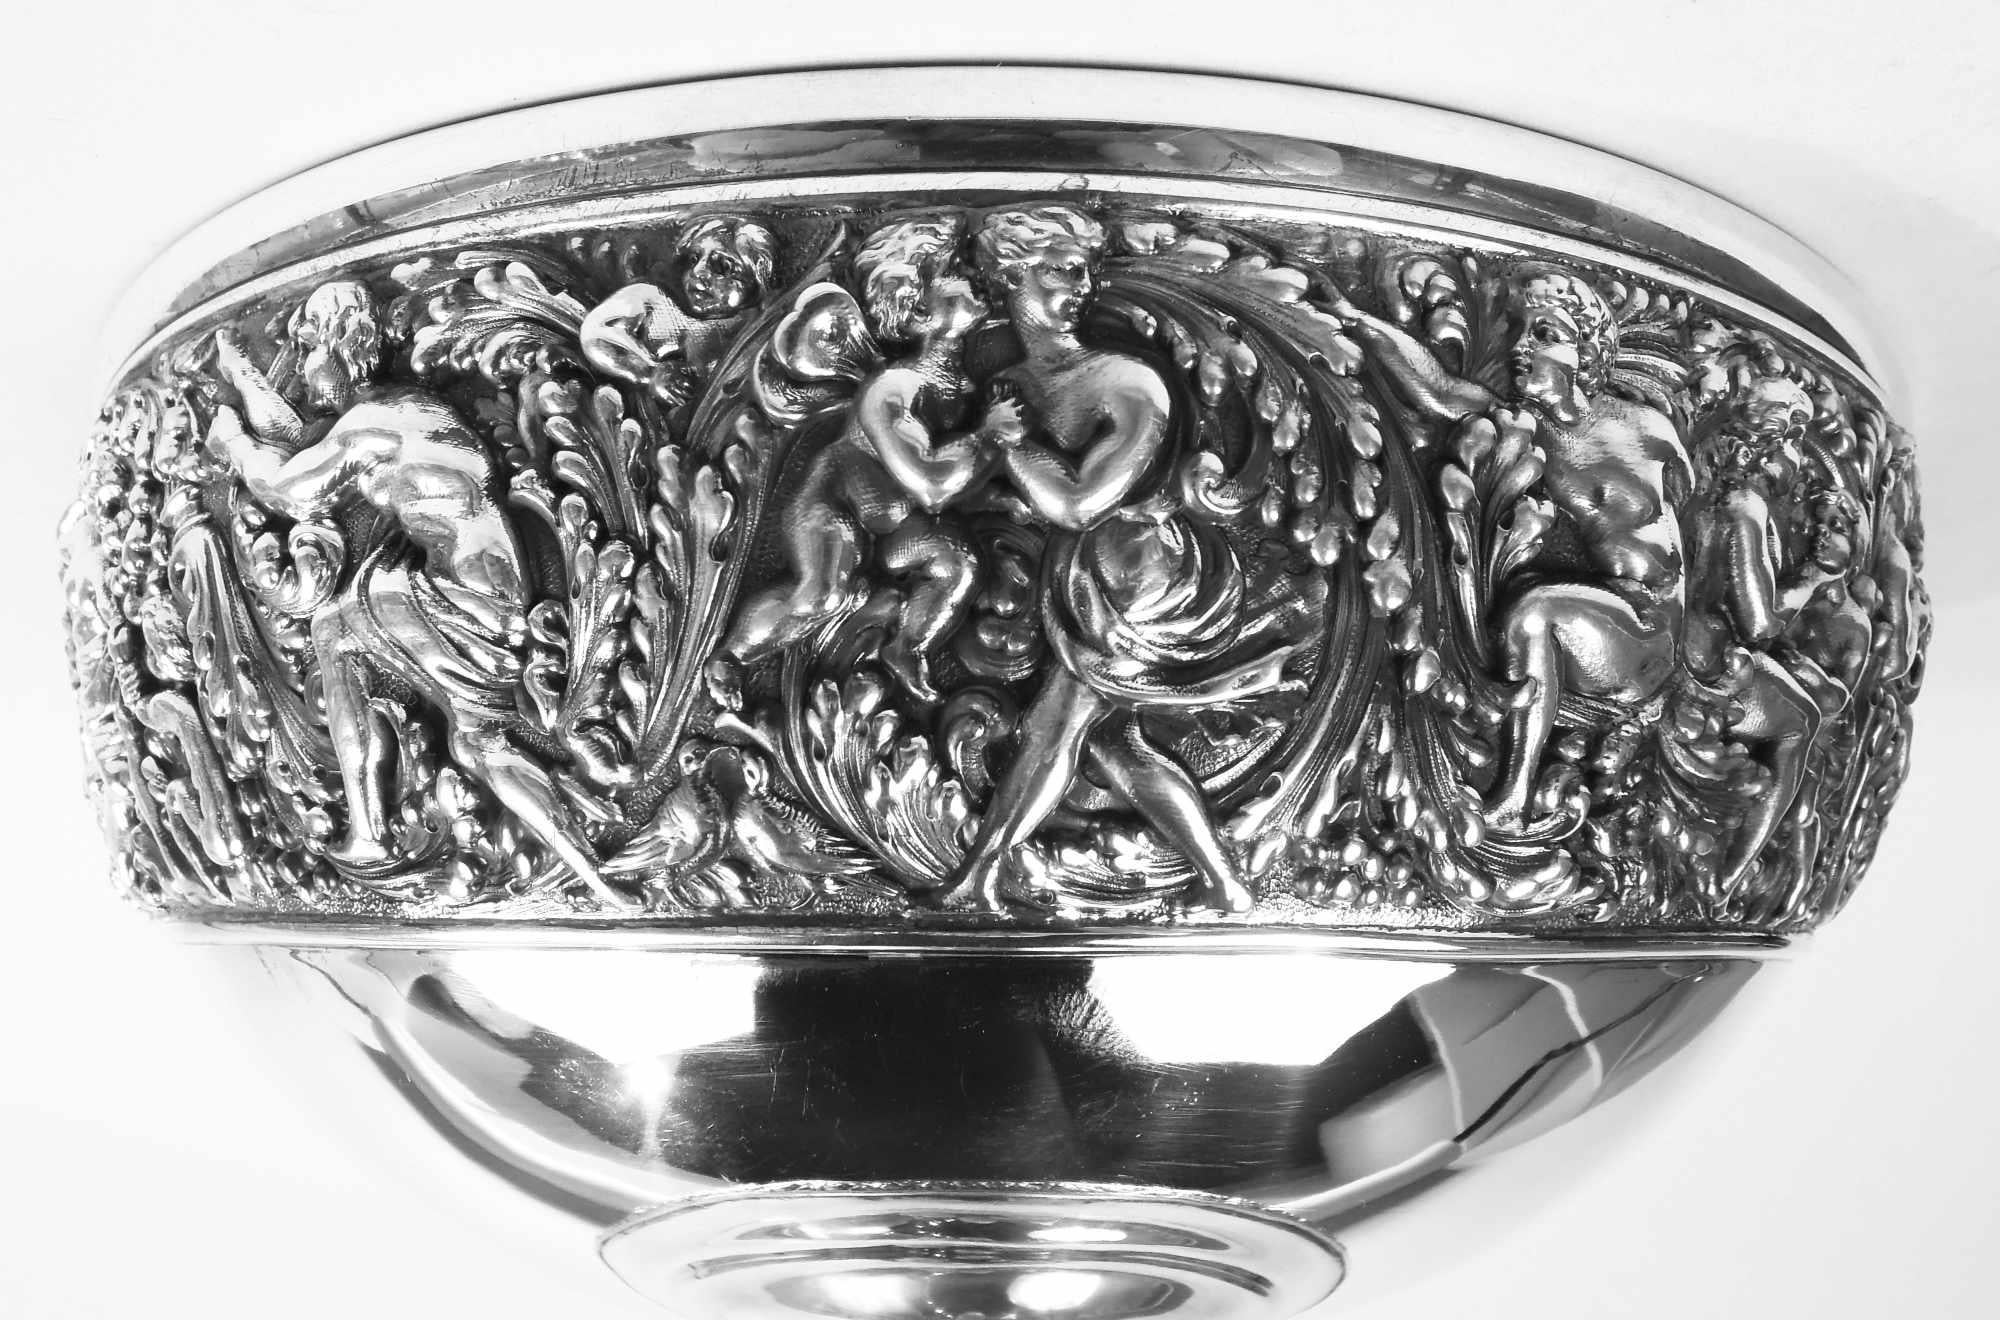 Tiffany Sterling Silver Centerpiece Bowl in Beaux Arts Olympian In Good Condition For Sale In New York, NY